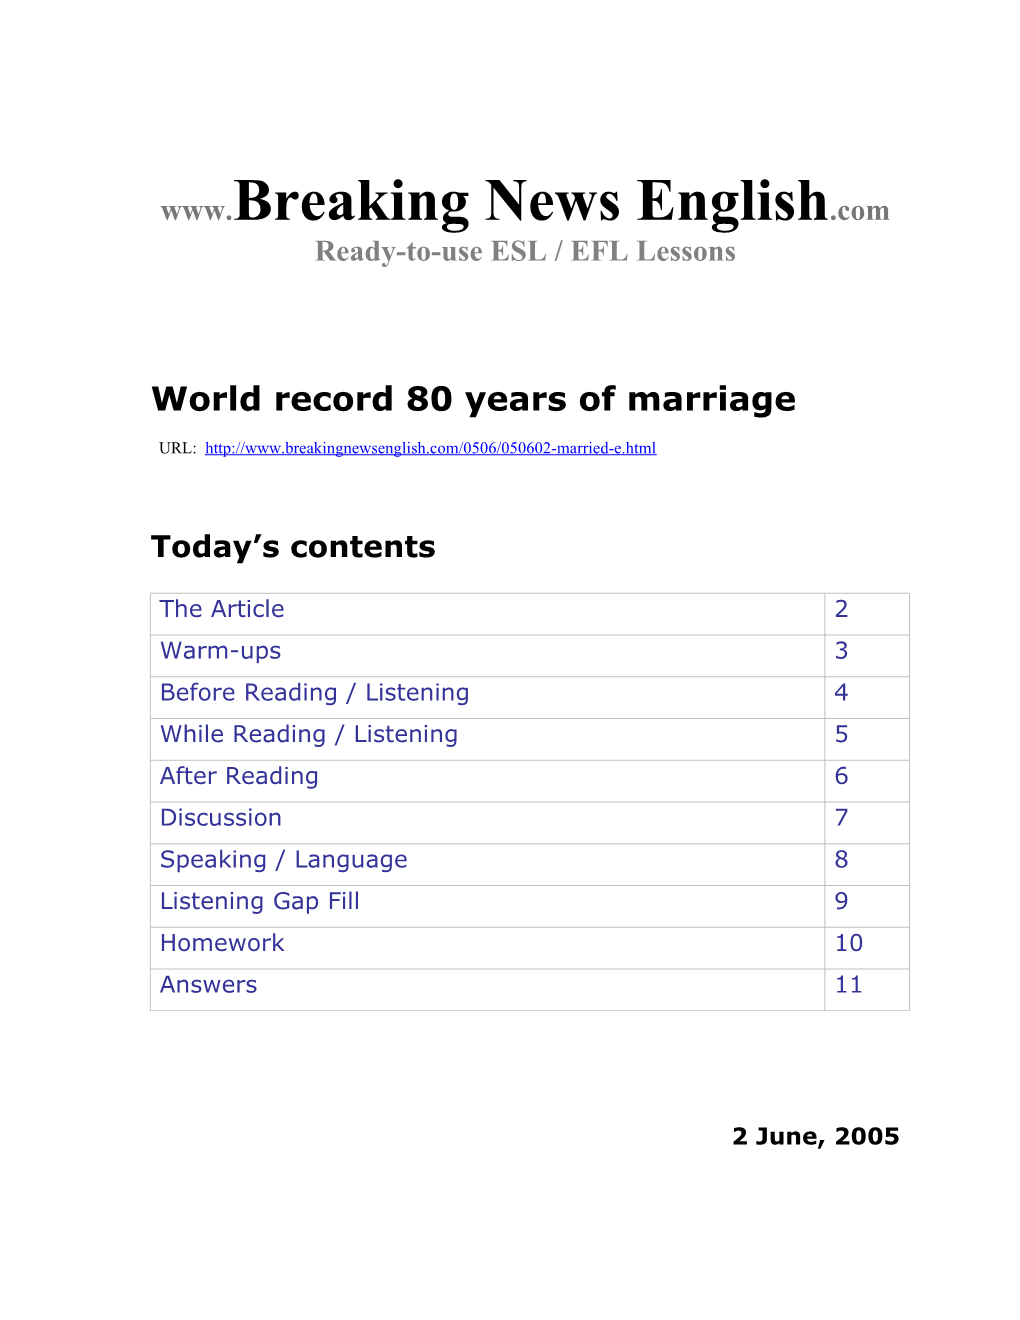 World Record 80 Years of Marriage